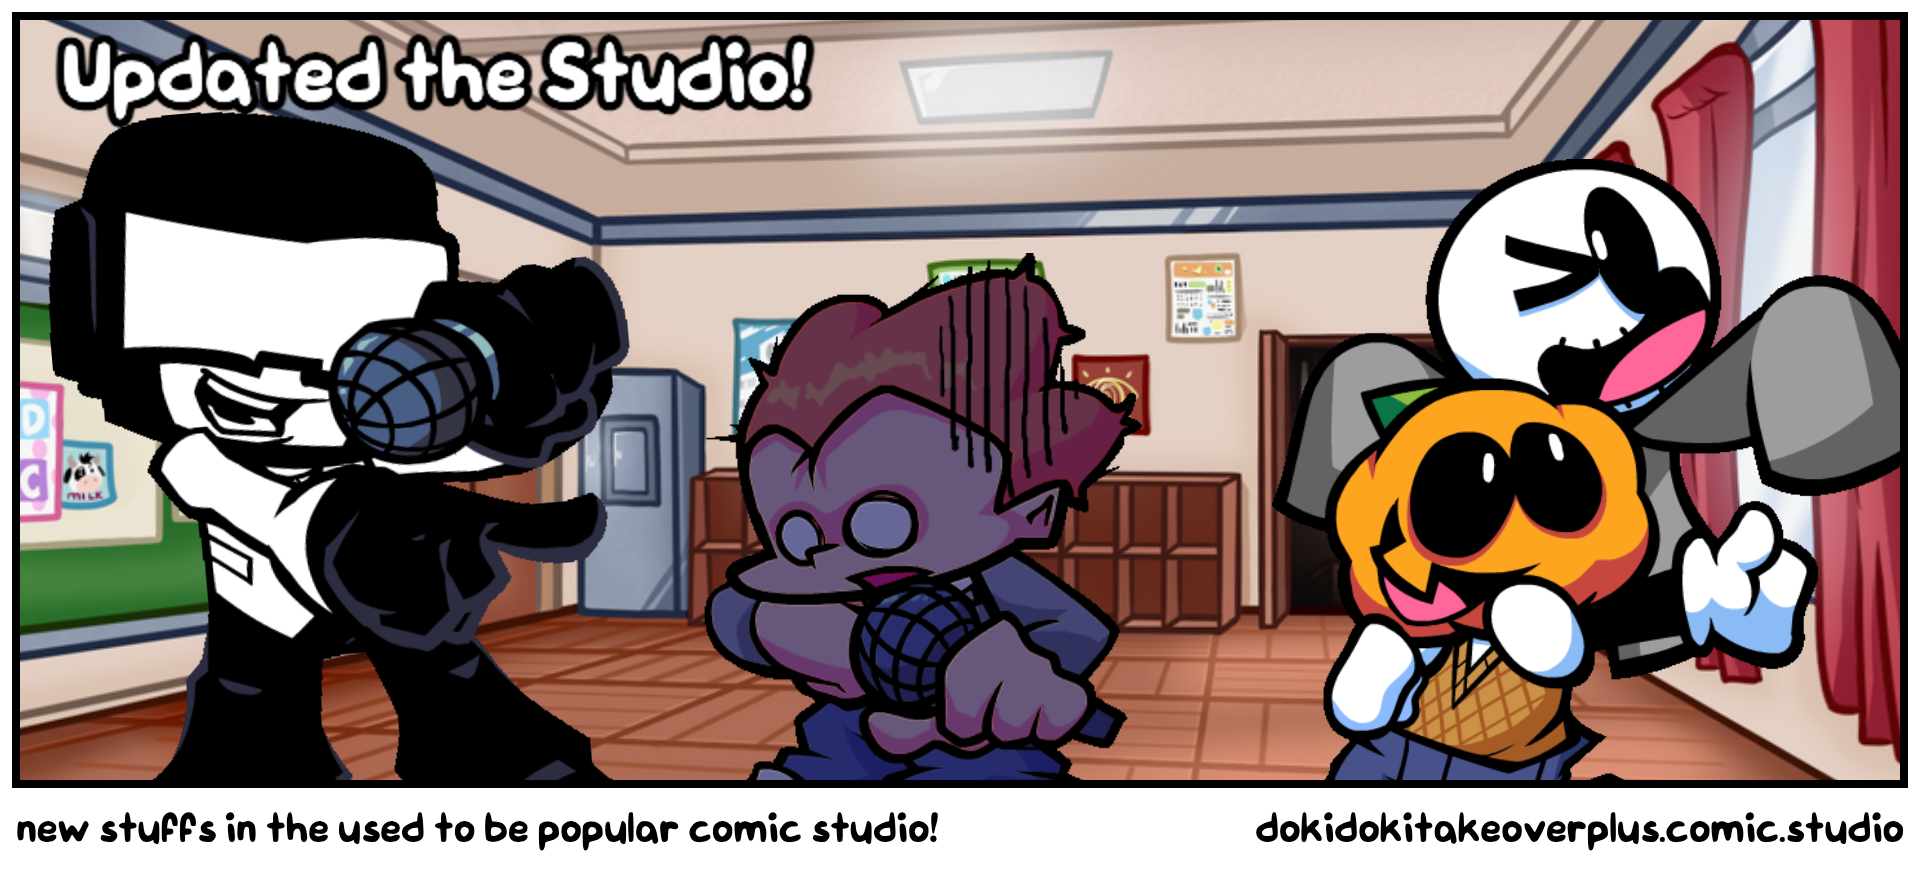 new stuffs in the used to be popular comic studio!